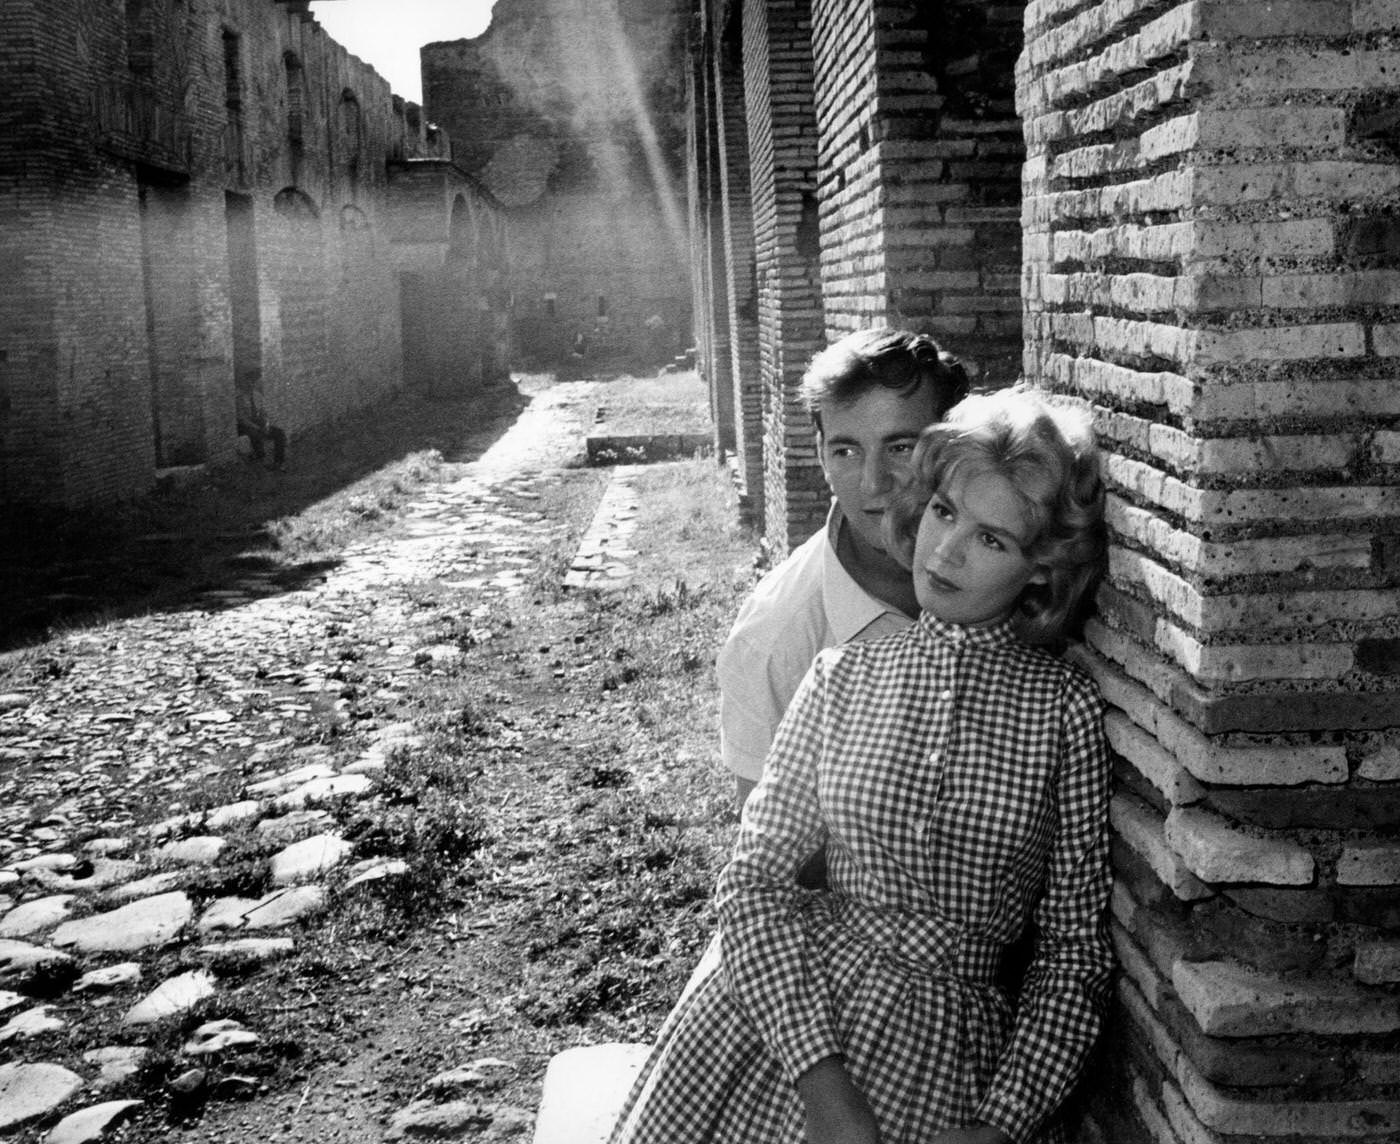 Bobby Darin and Sandra Dee while filming "Come September" at Ostia Antica, Italy, 1960.